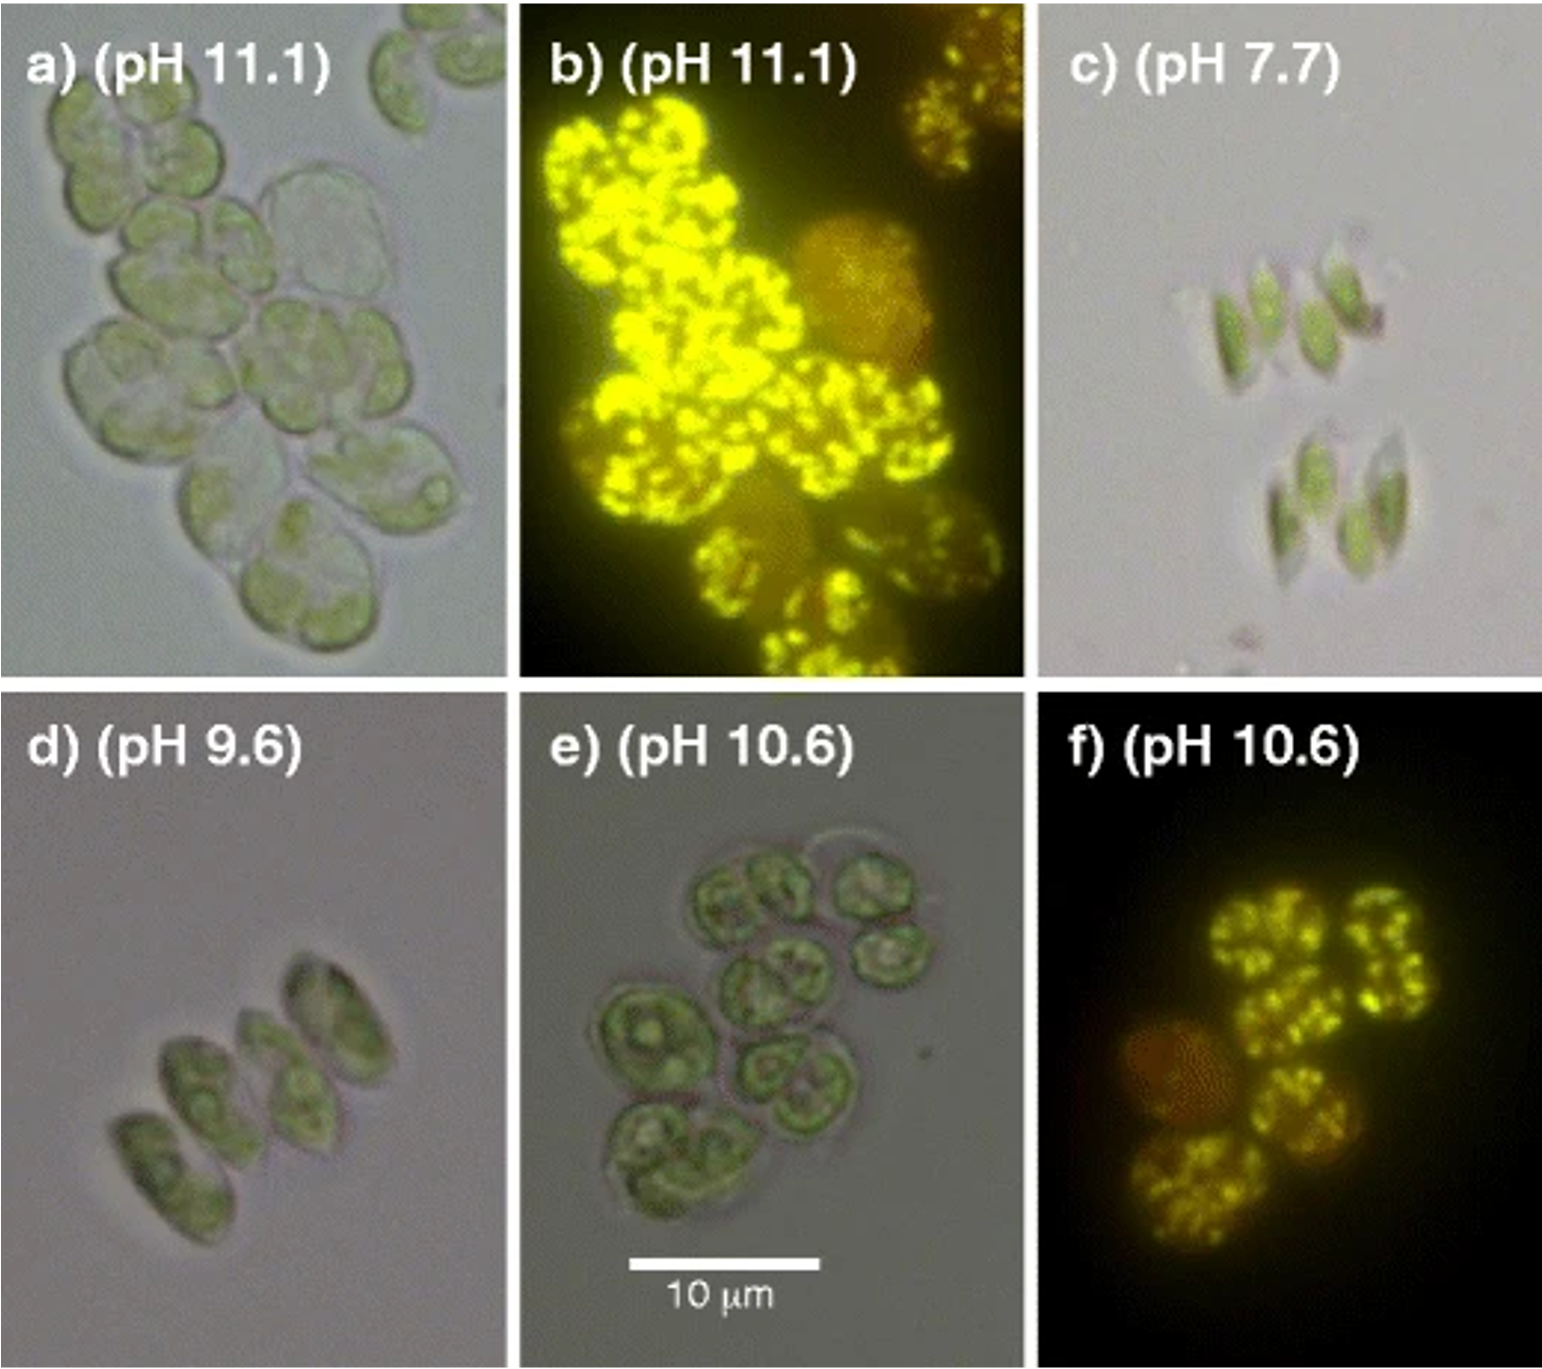 Micrographs detailing morphology changes in Scenedesmus sp. strain WC-1